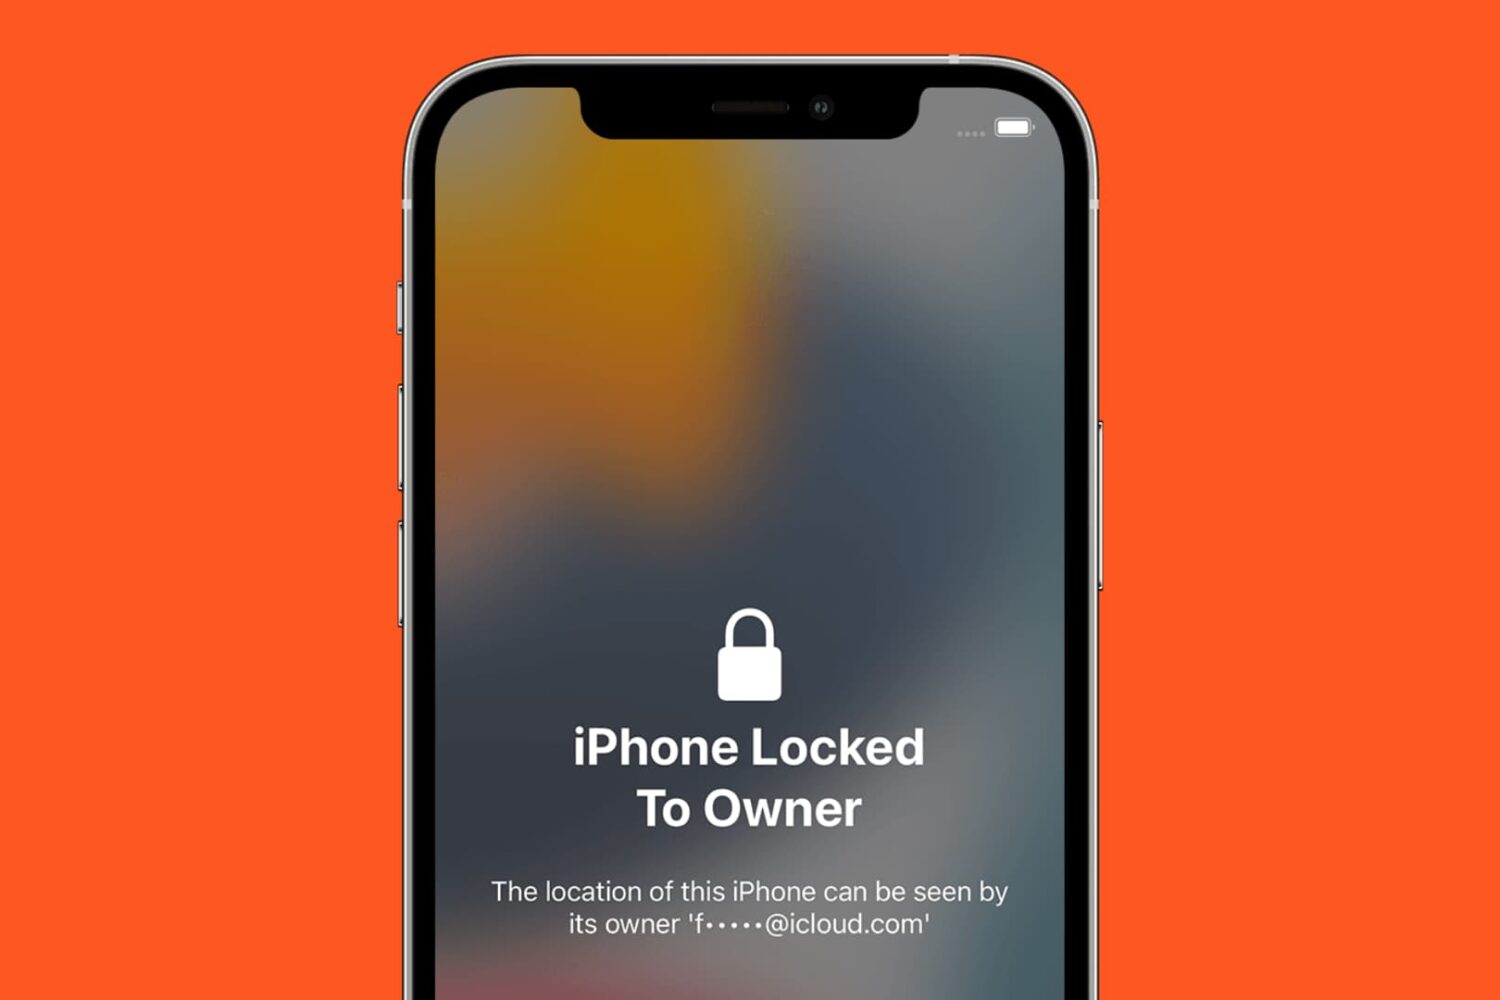 Check Activation Lock on iPhone